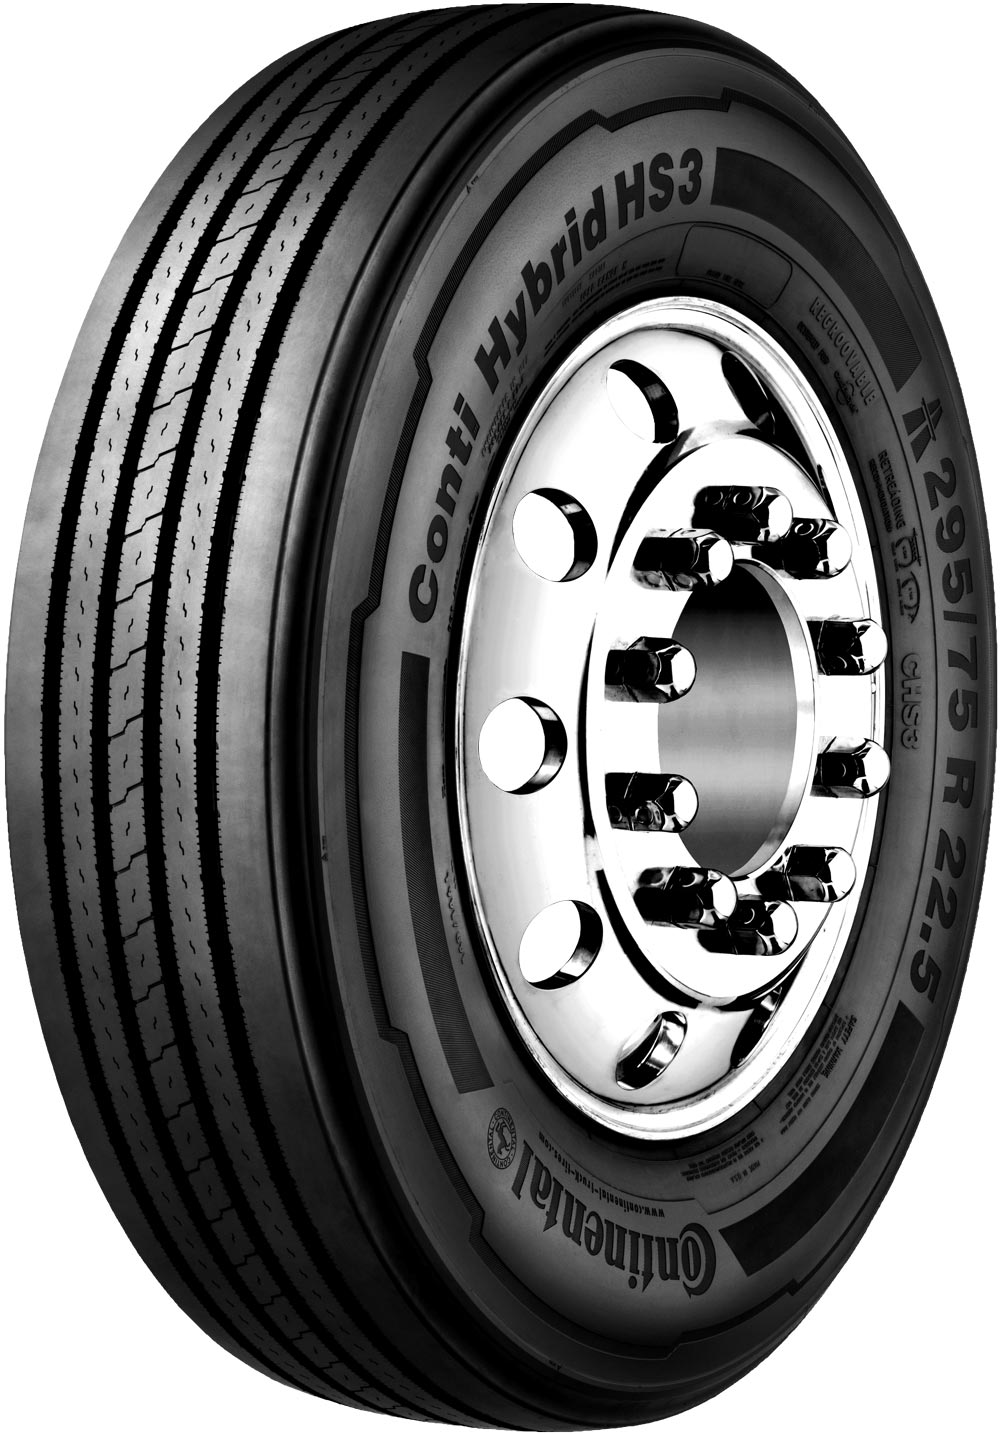 product_type-heavy_tires CONTINENTAL Conti Hybrid HS3 16PR 285/70 R19.5 146M